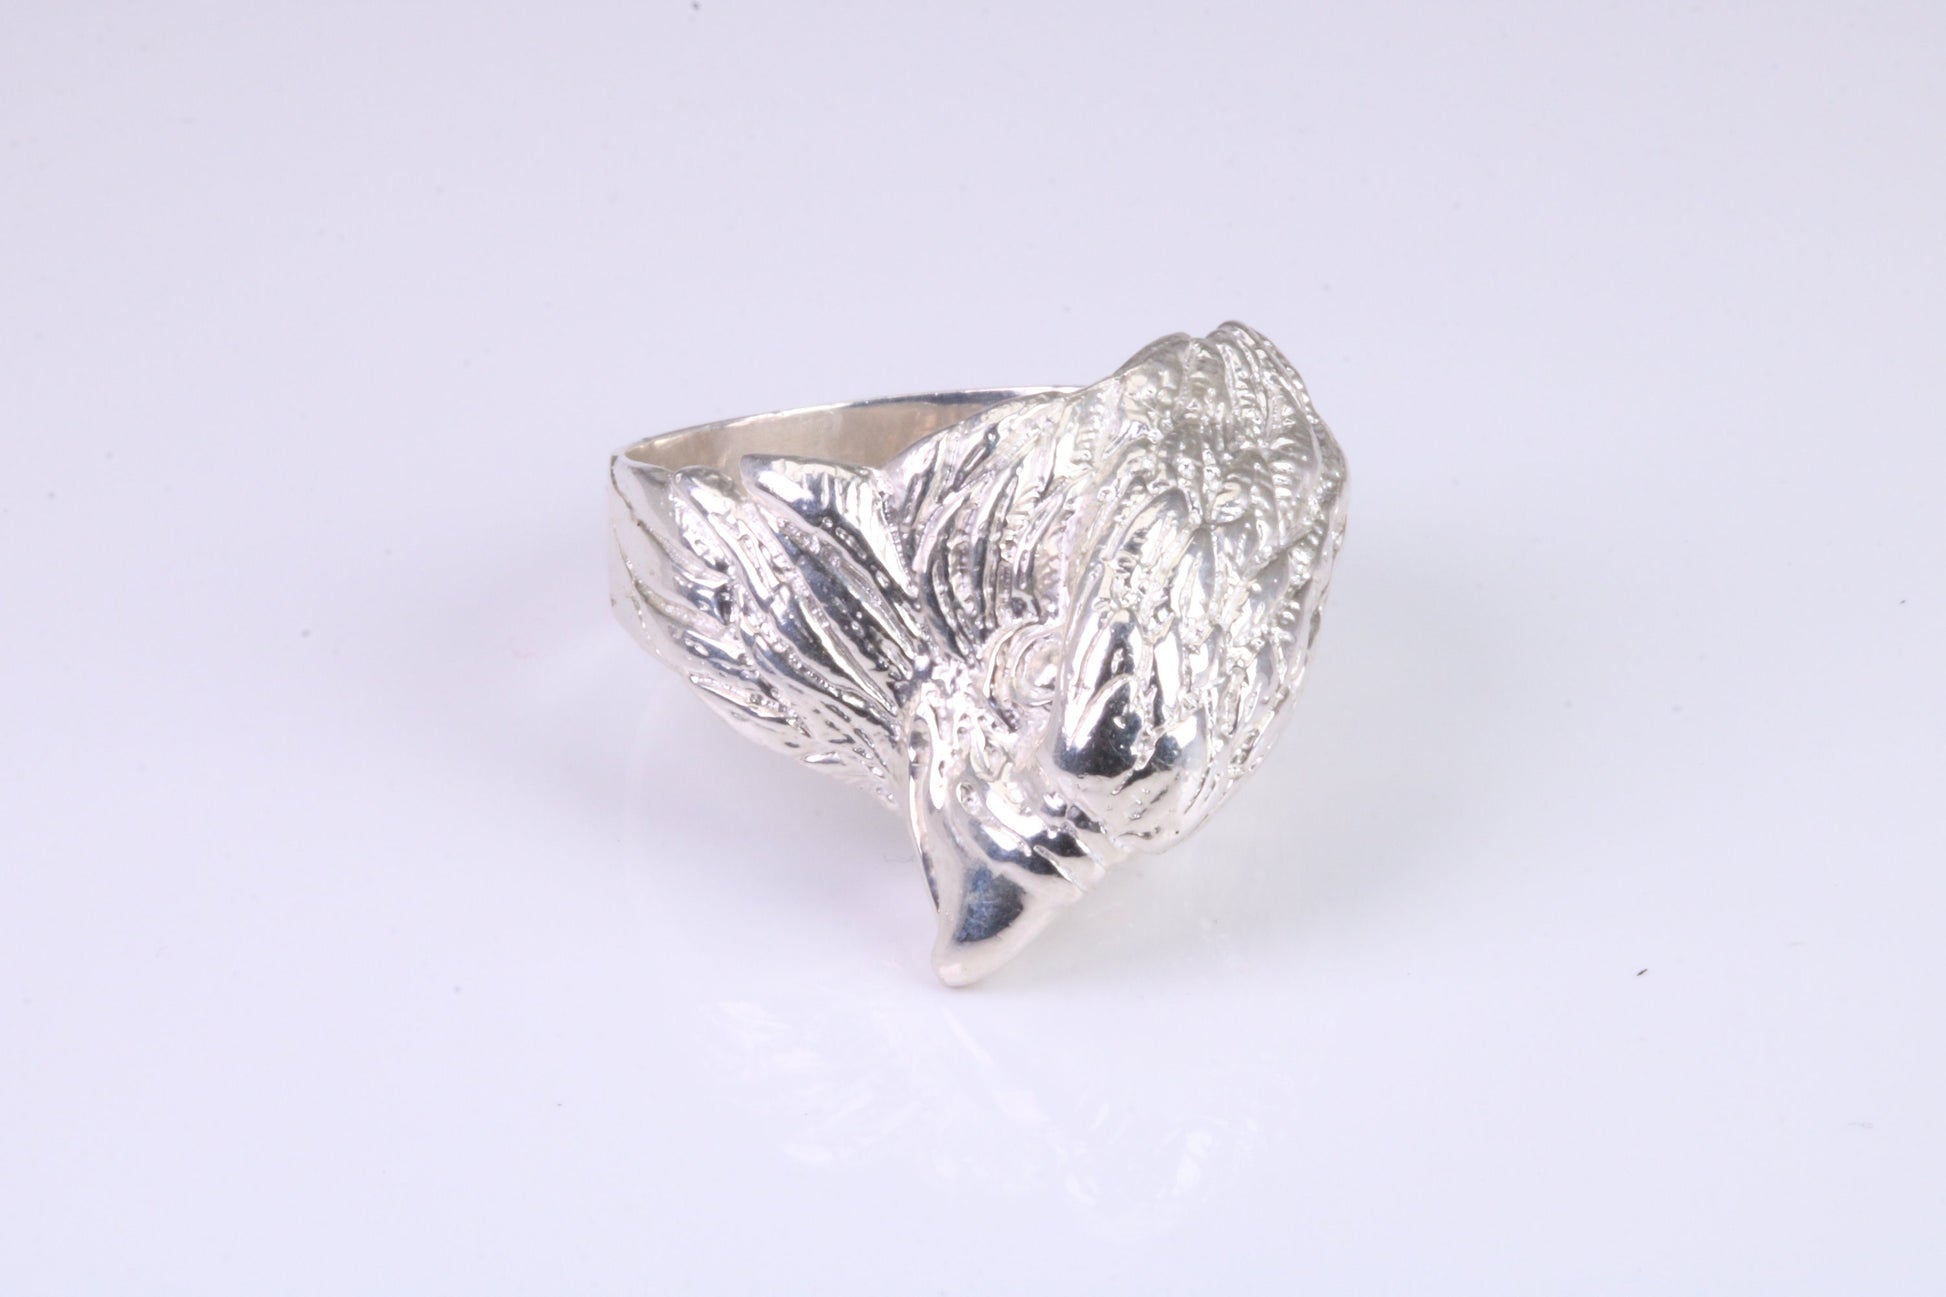 Large and heavy American Eagle head ring,solid silver, perfect for all age groups. Available in silver, yellow gold, white gold and platinum